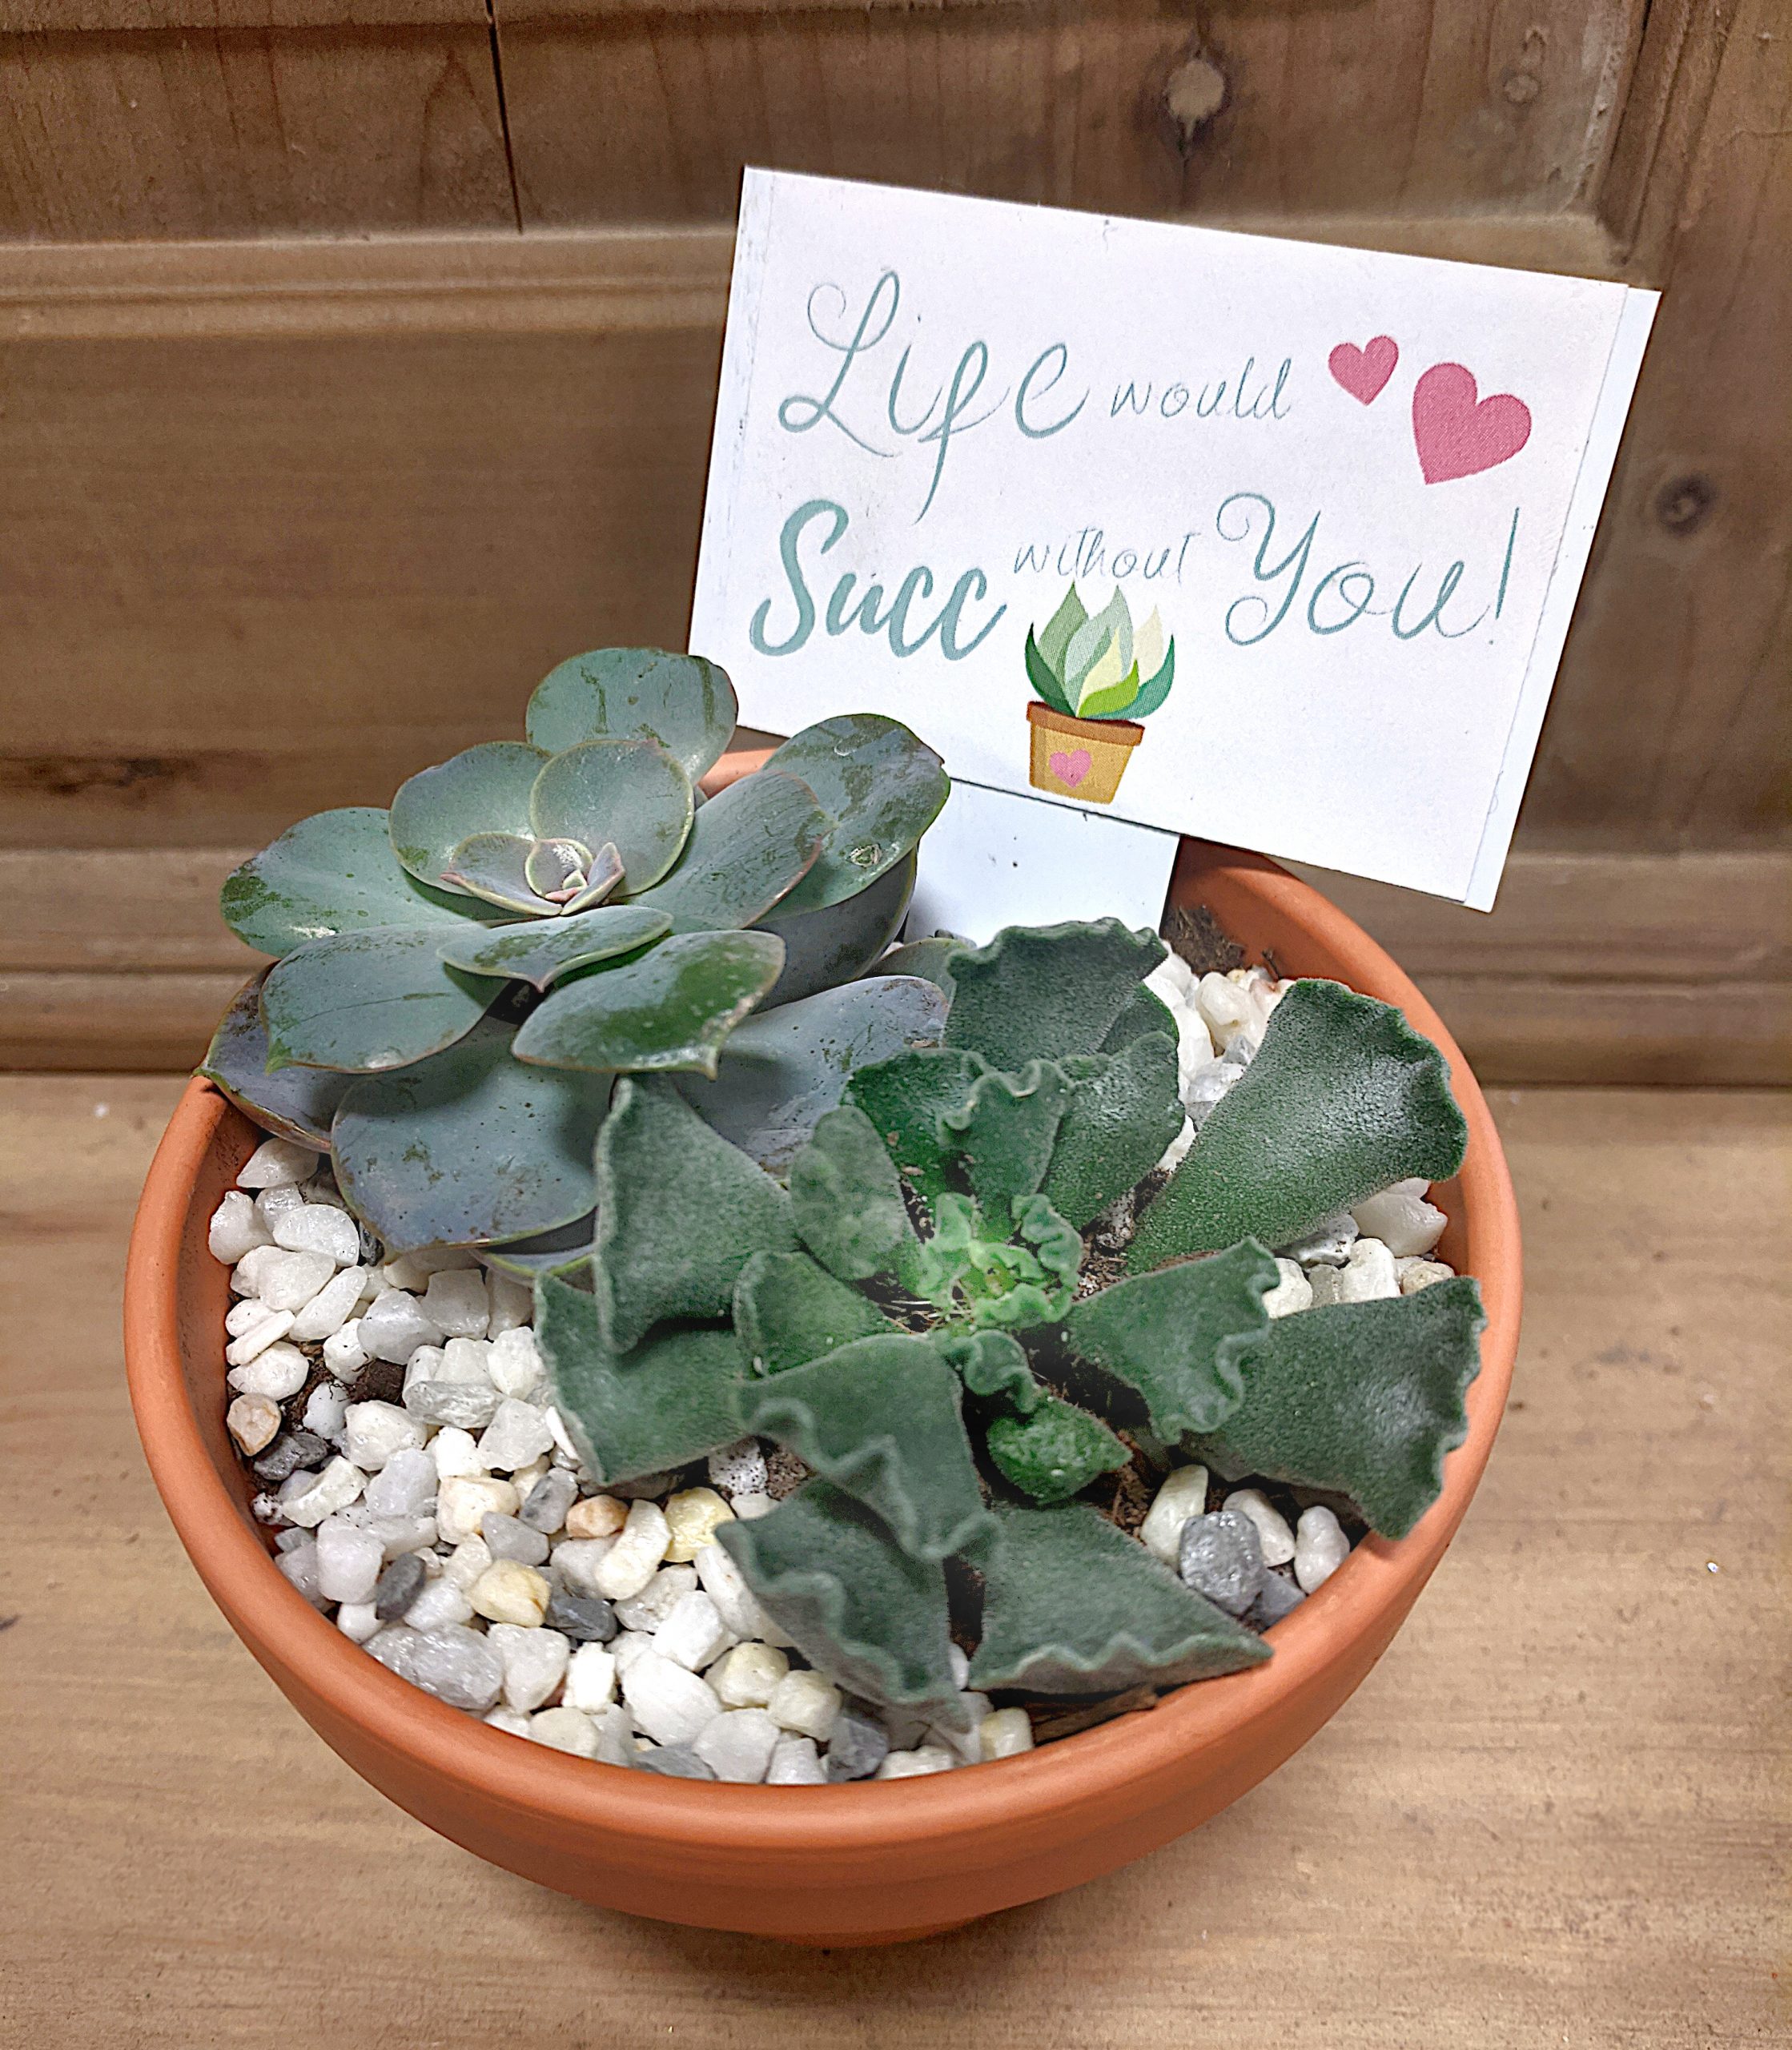 palentine's day succulents potted up in terra cotta with Life would Succ without you!